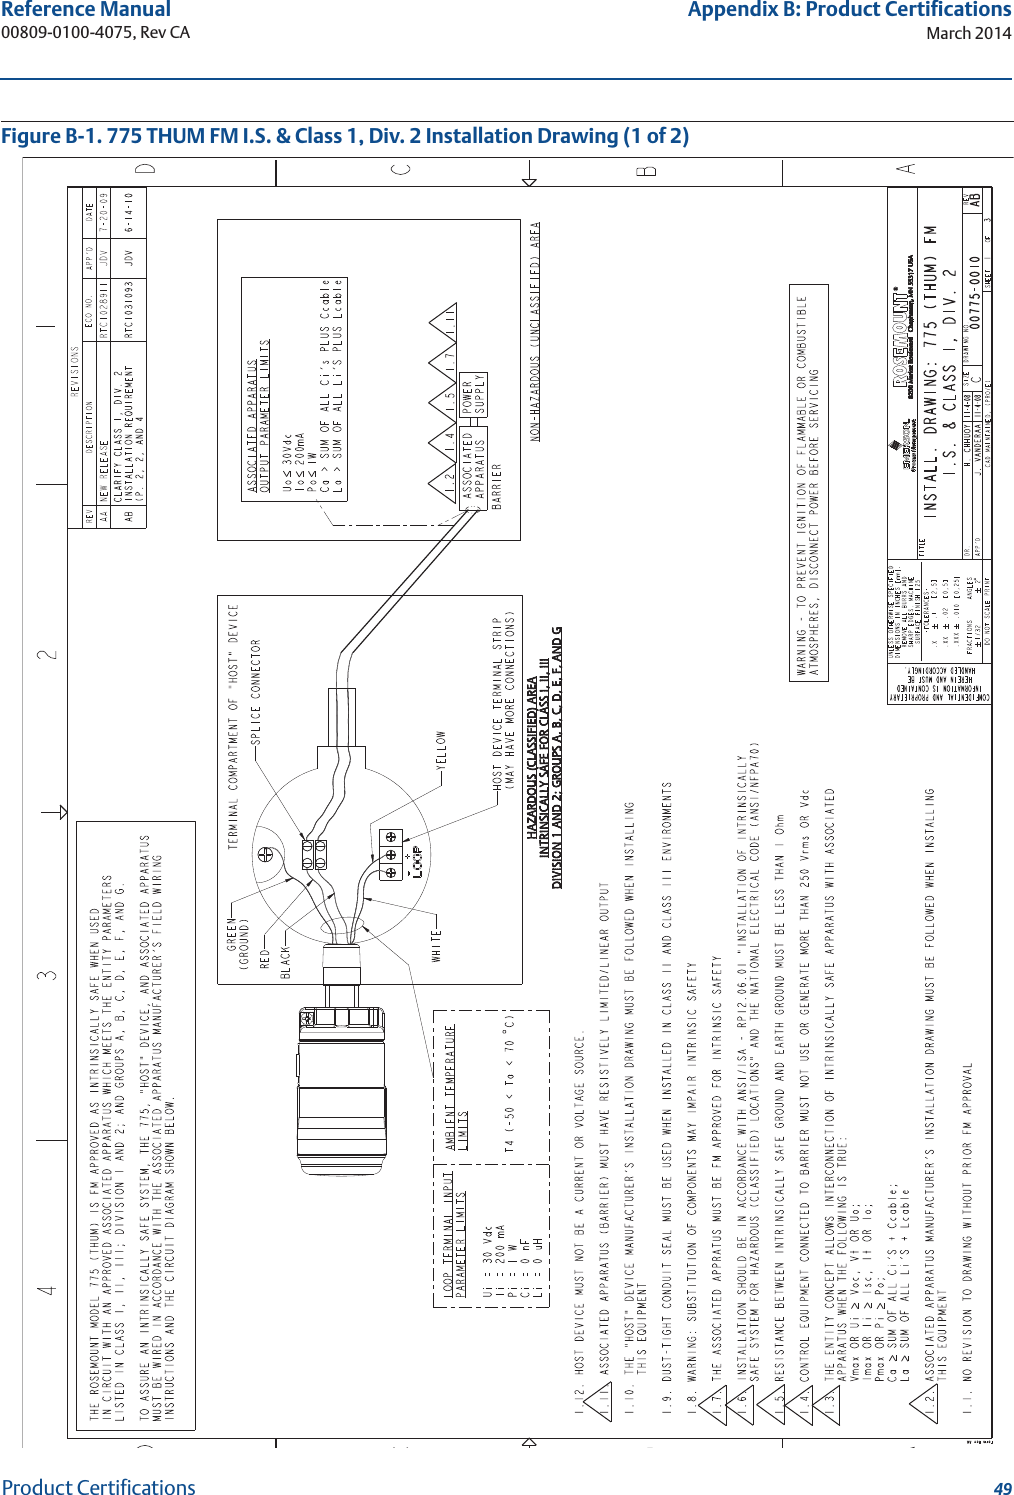 49Reference Manual 00809-0100-4075, Rev CAAppendix B: Product CertificationsMarch 2014Product CertificationsFigure B-1. 775 THUM FM I.S. &amp; Class 1, Div. 2 Installation Drawing (1 of 2)